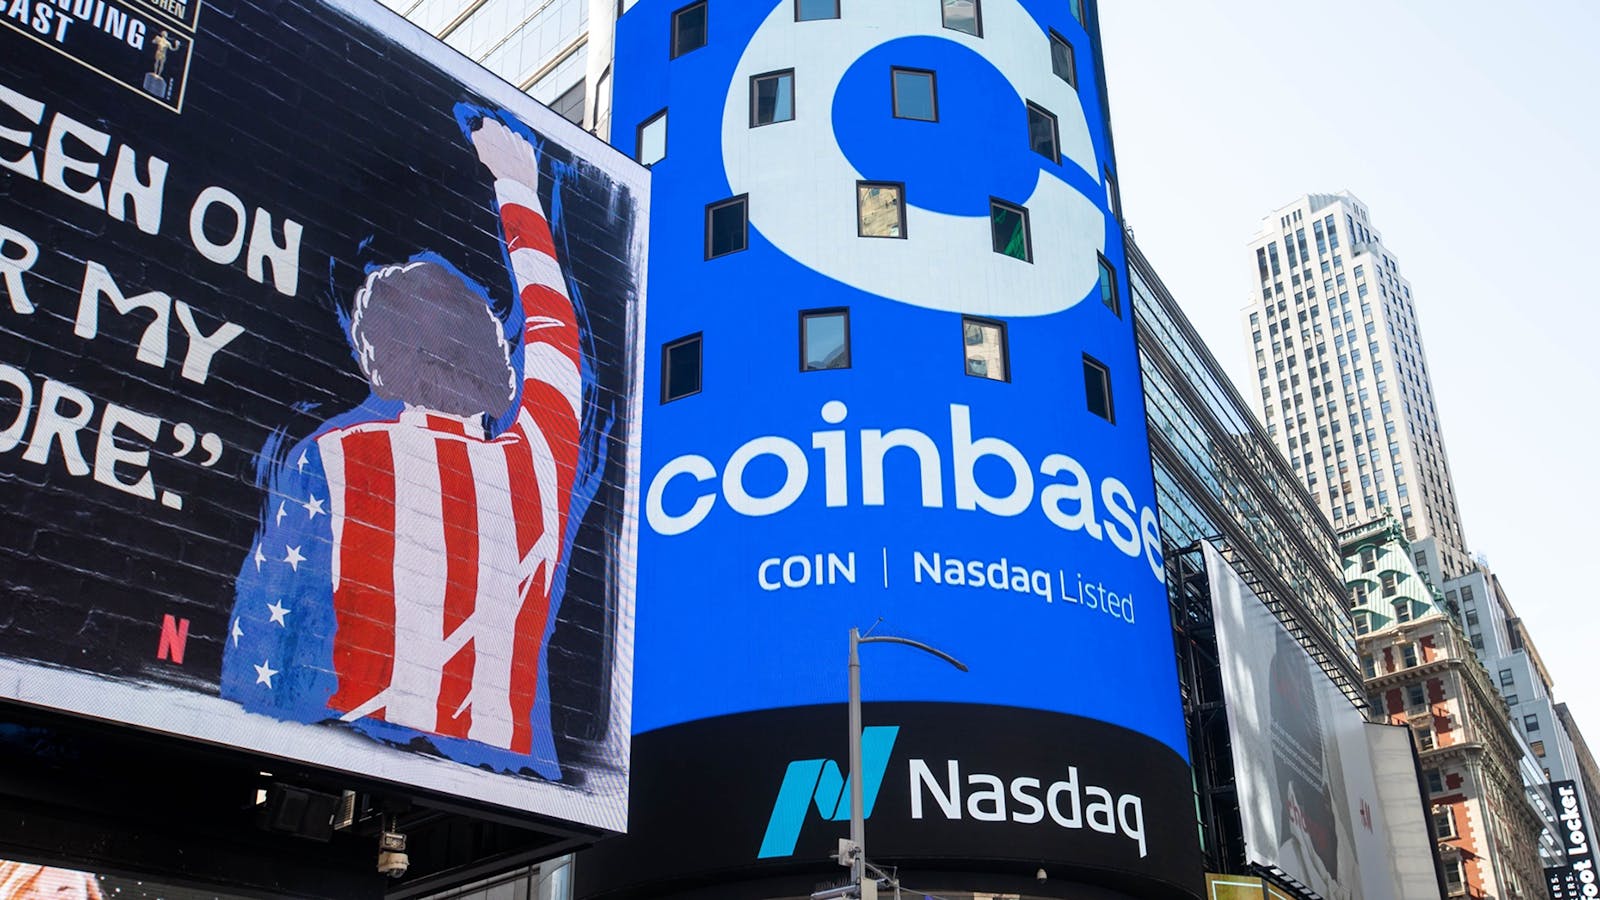 Coinbase signage at the Nasdaq in New York. Photo by Bloomberg.